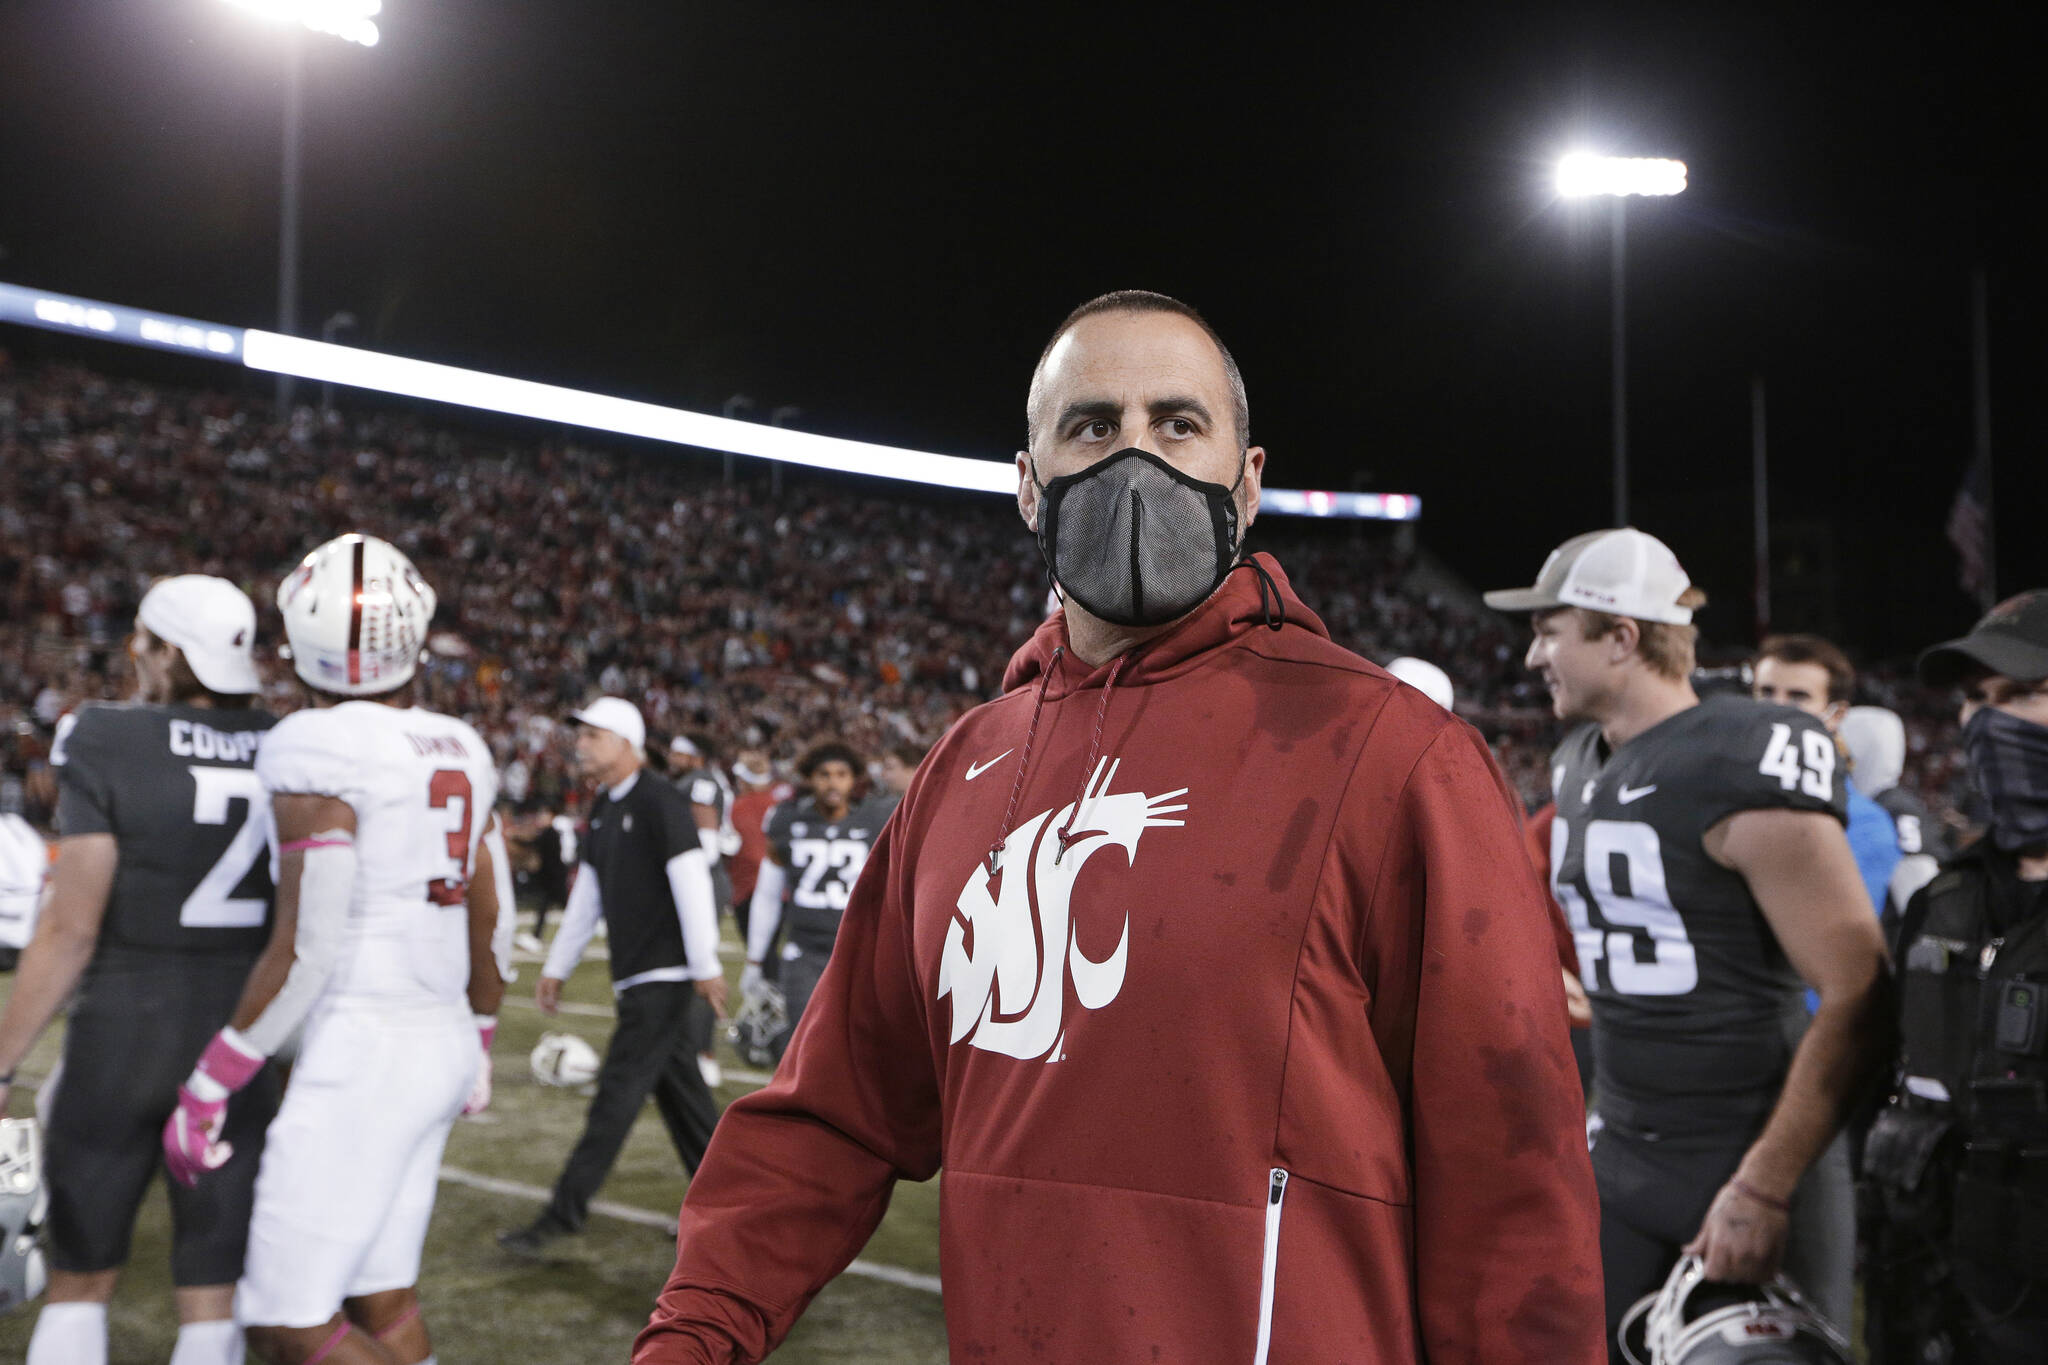 Washington State coach Nick Rolovich walks on the field after the team’s NCAA college football game against Stanford, Saturday, Oct. 16, 2021, in Pullman, Wash. Washington State won 34-31. (AP Photo/Young Kwak)